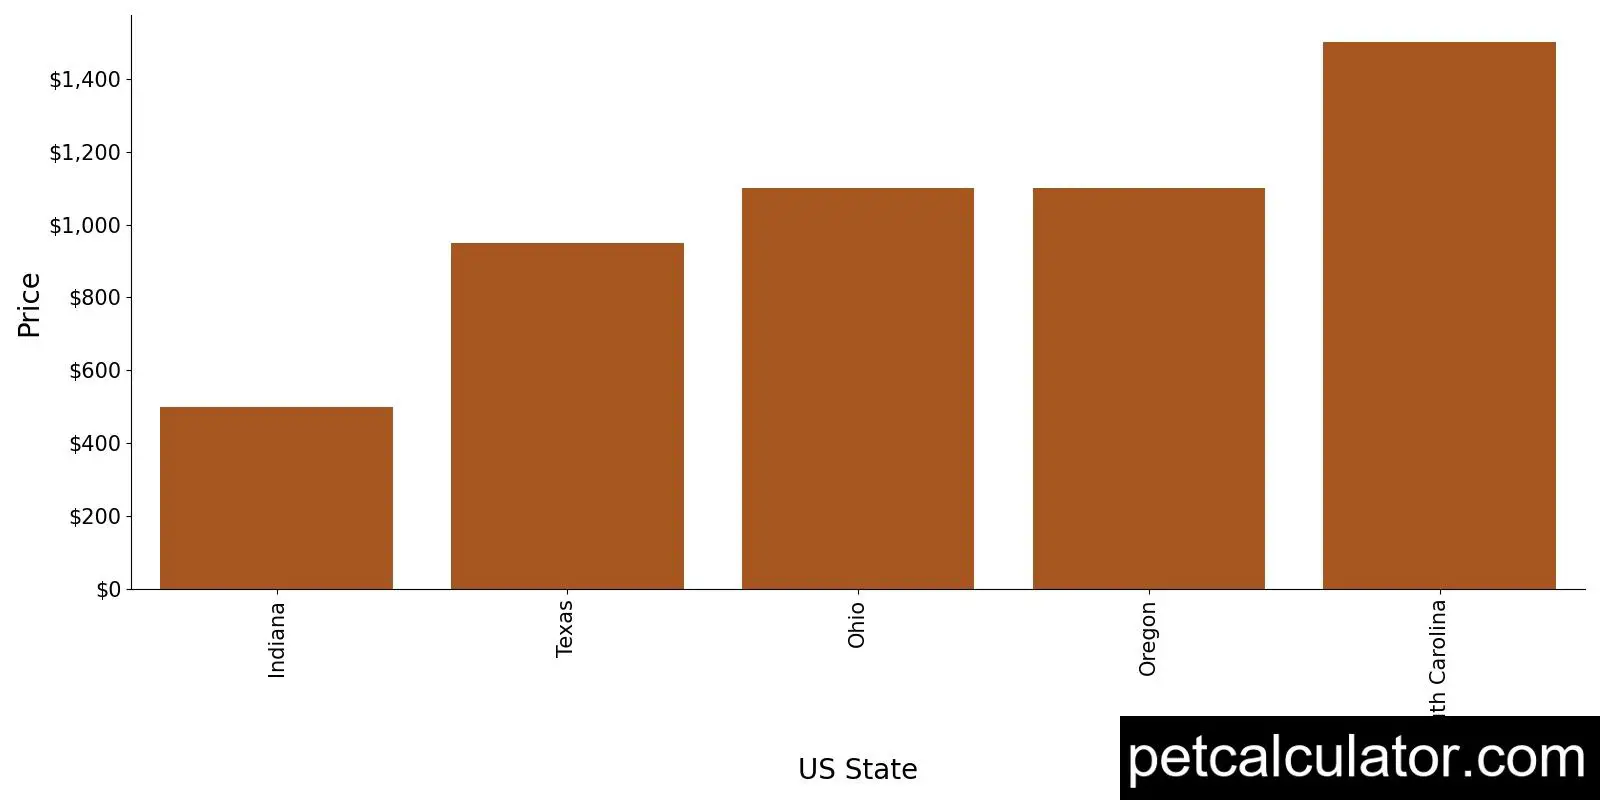 Price of Manchester Terrier by US State 